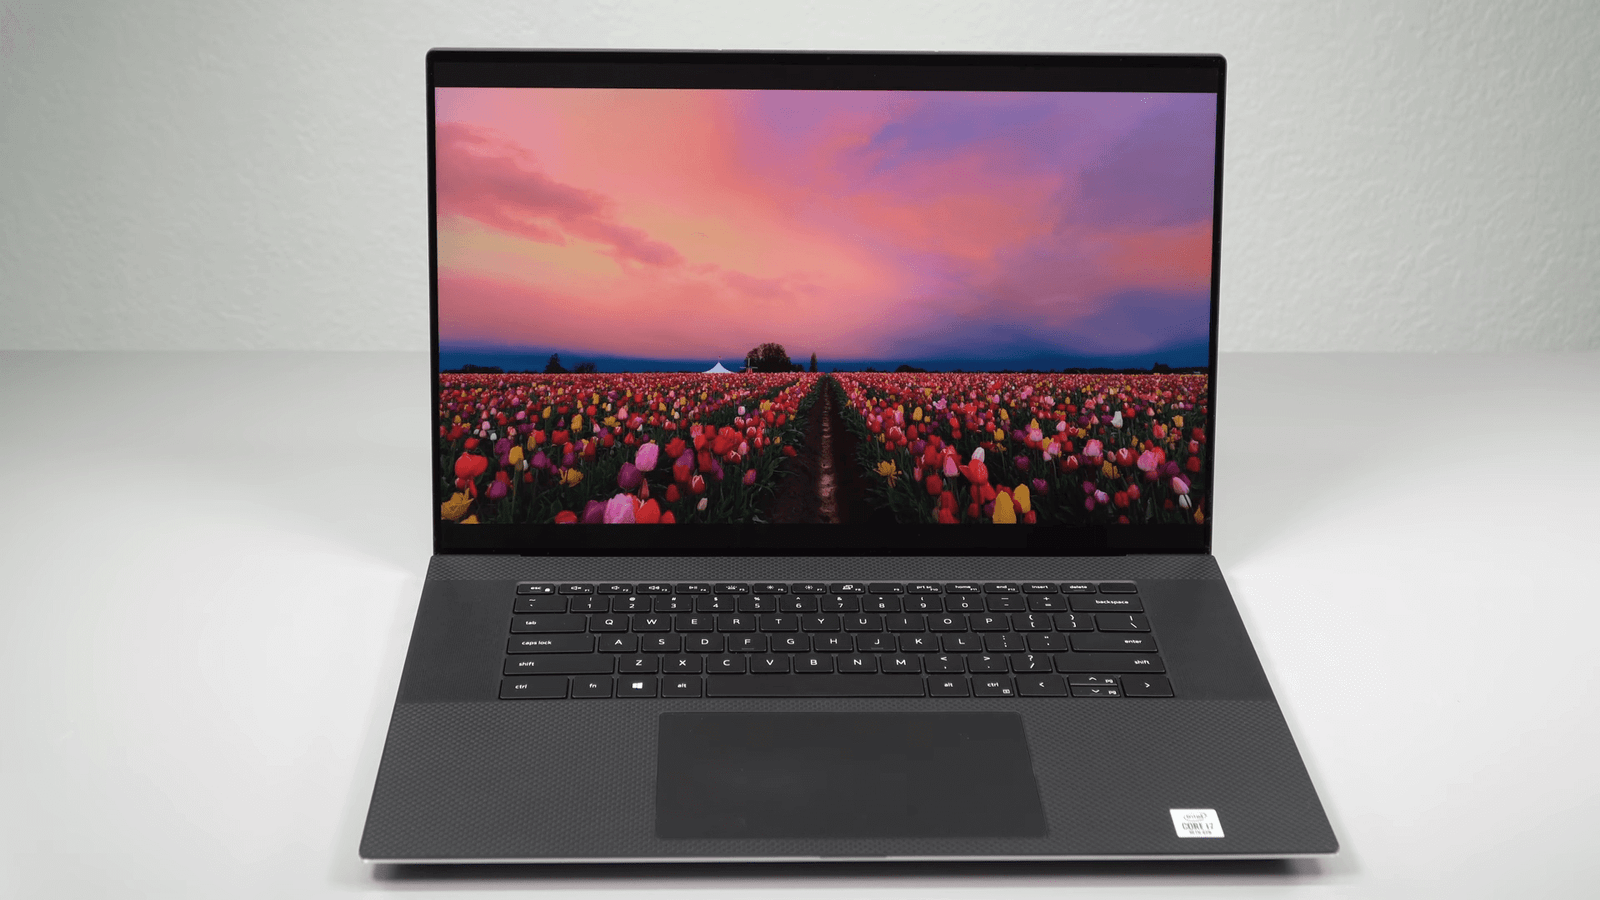 Dell Xps 17 9700 Vs Apple Macbook Pro 16 Which One You Should Choose The Worlds Best And 8390